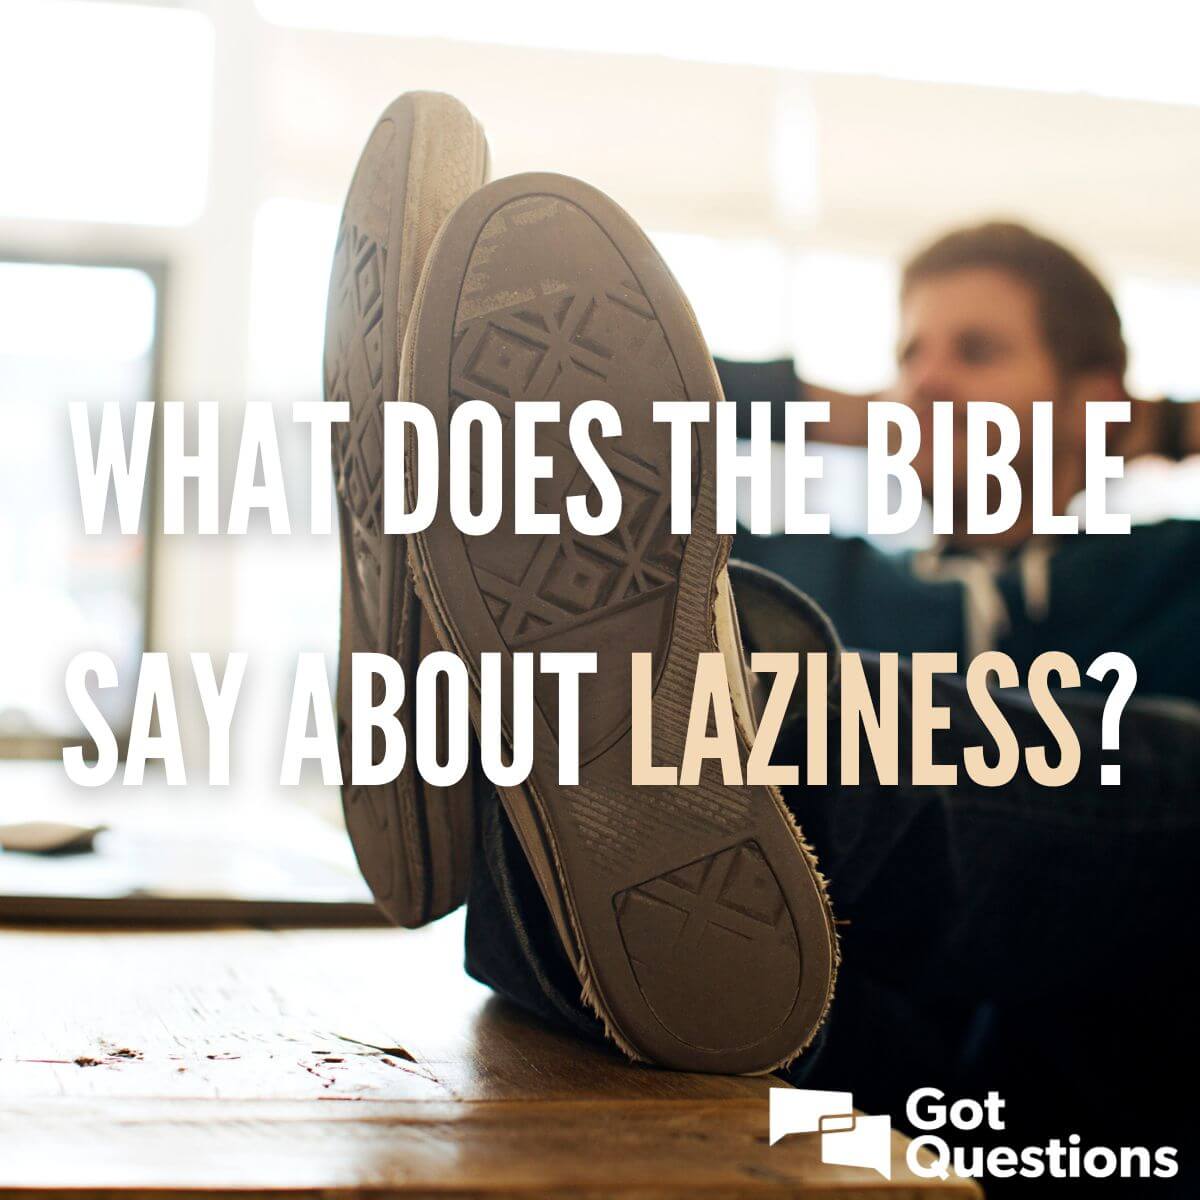 What does the Bible say about laziness?